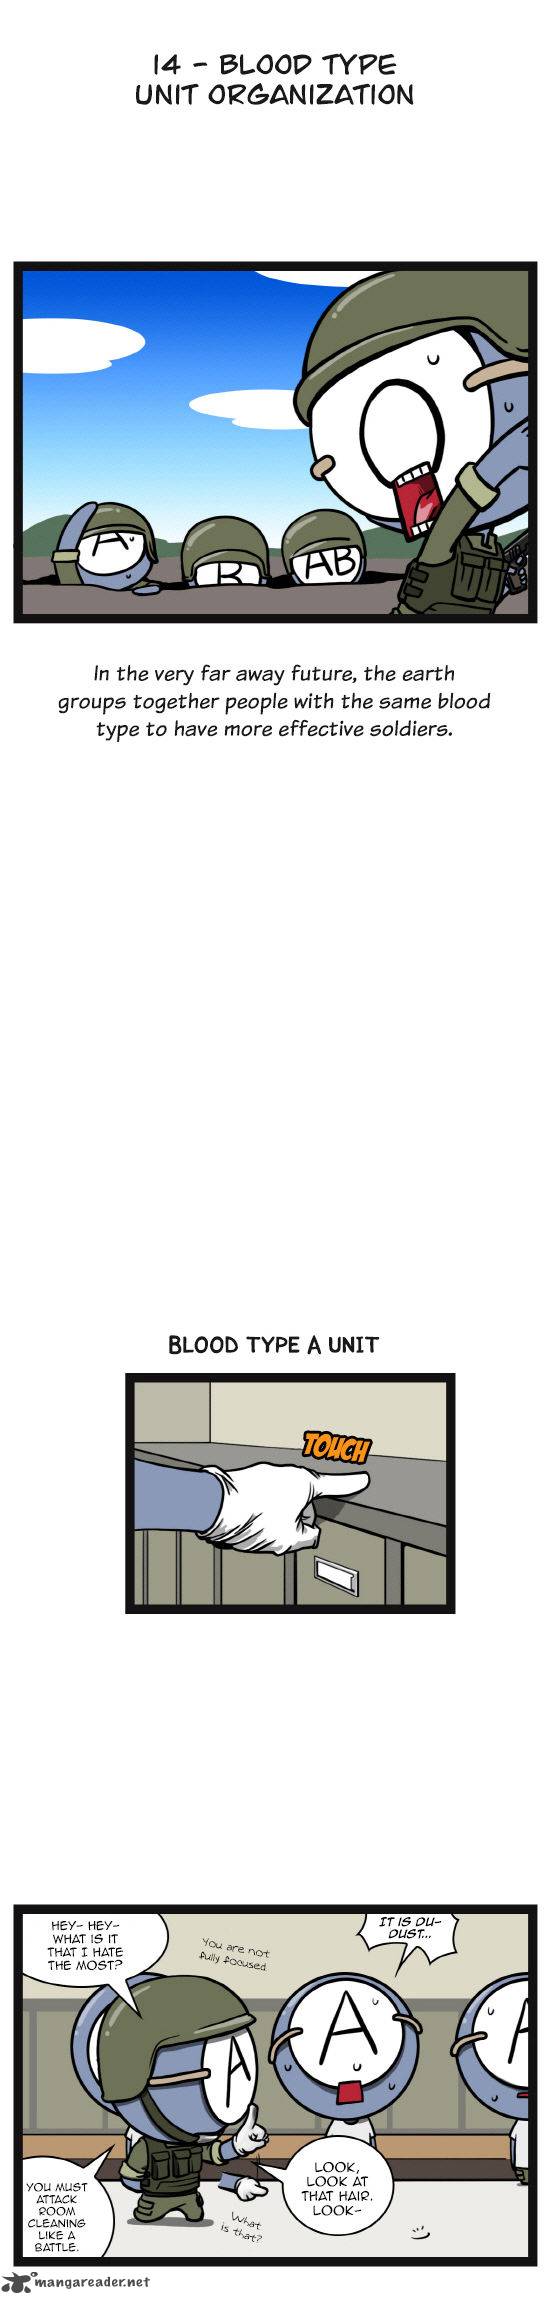 A Simple Thinking About Blood Types Chapter 14 Page 2